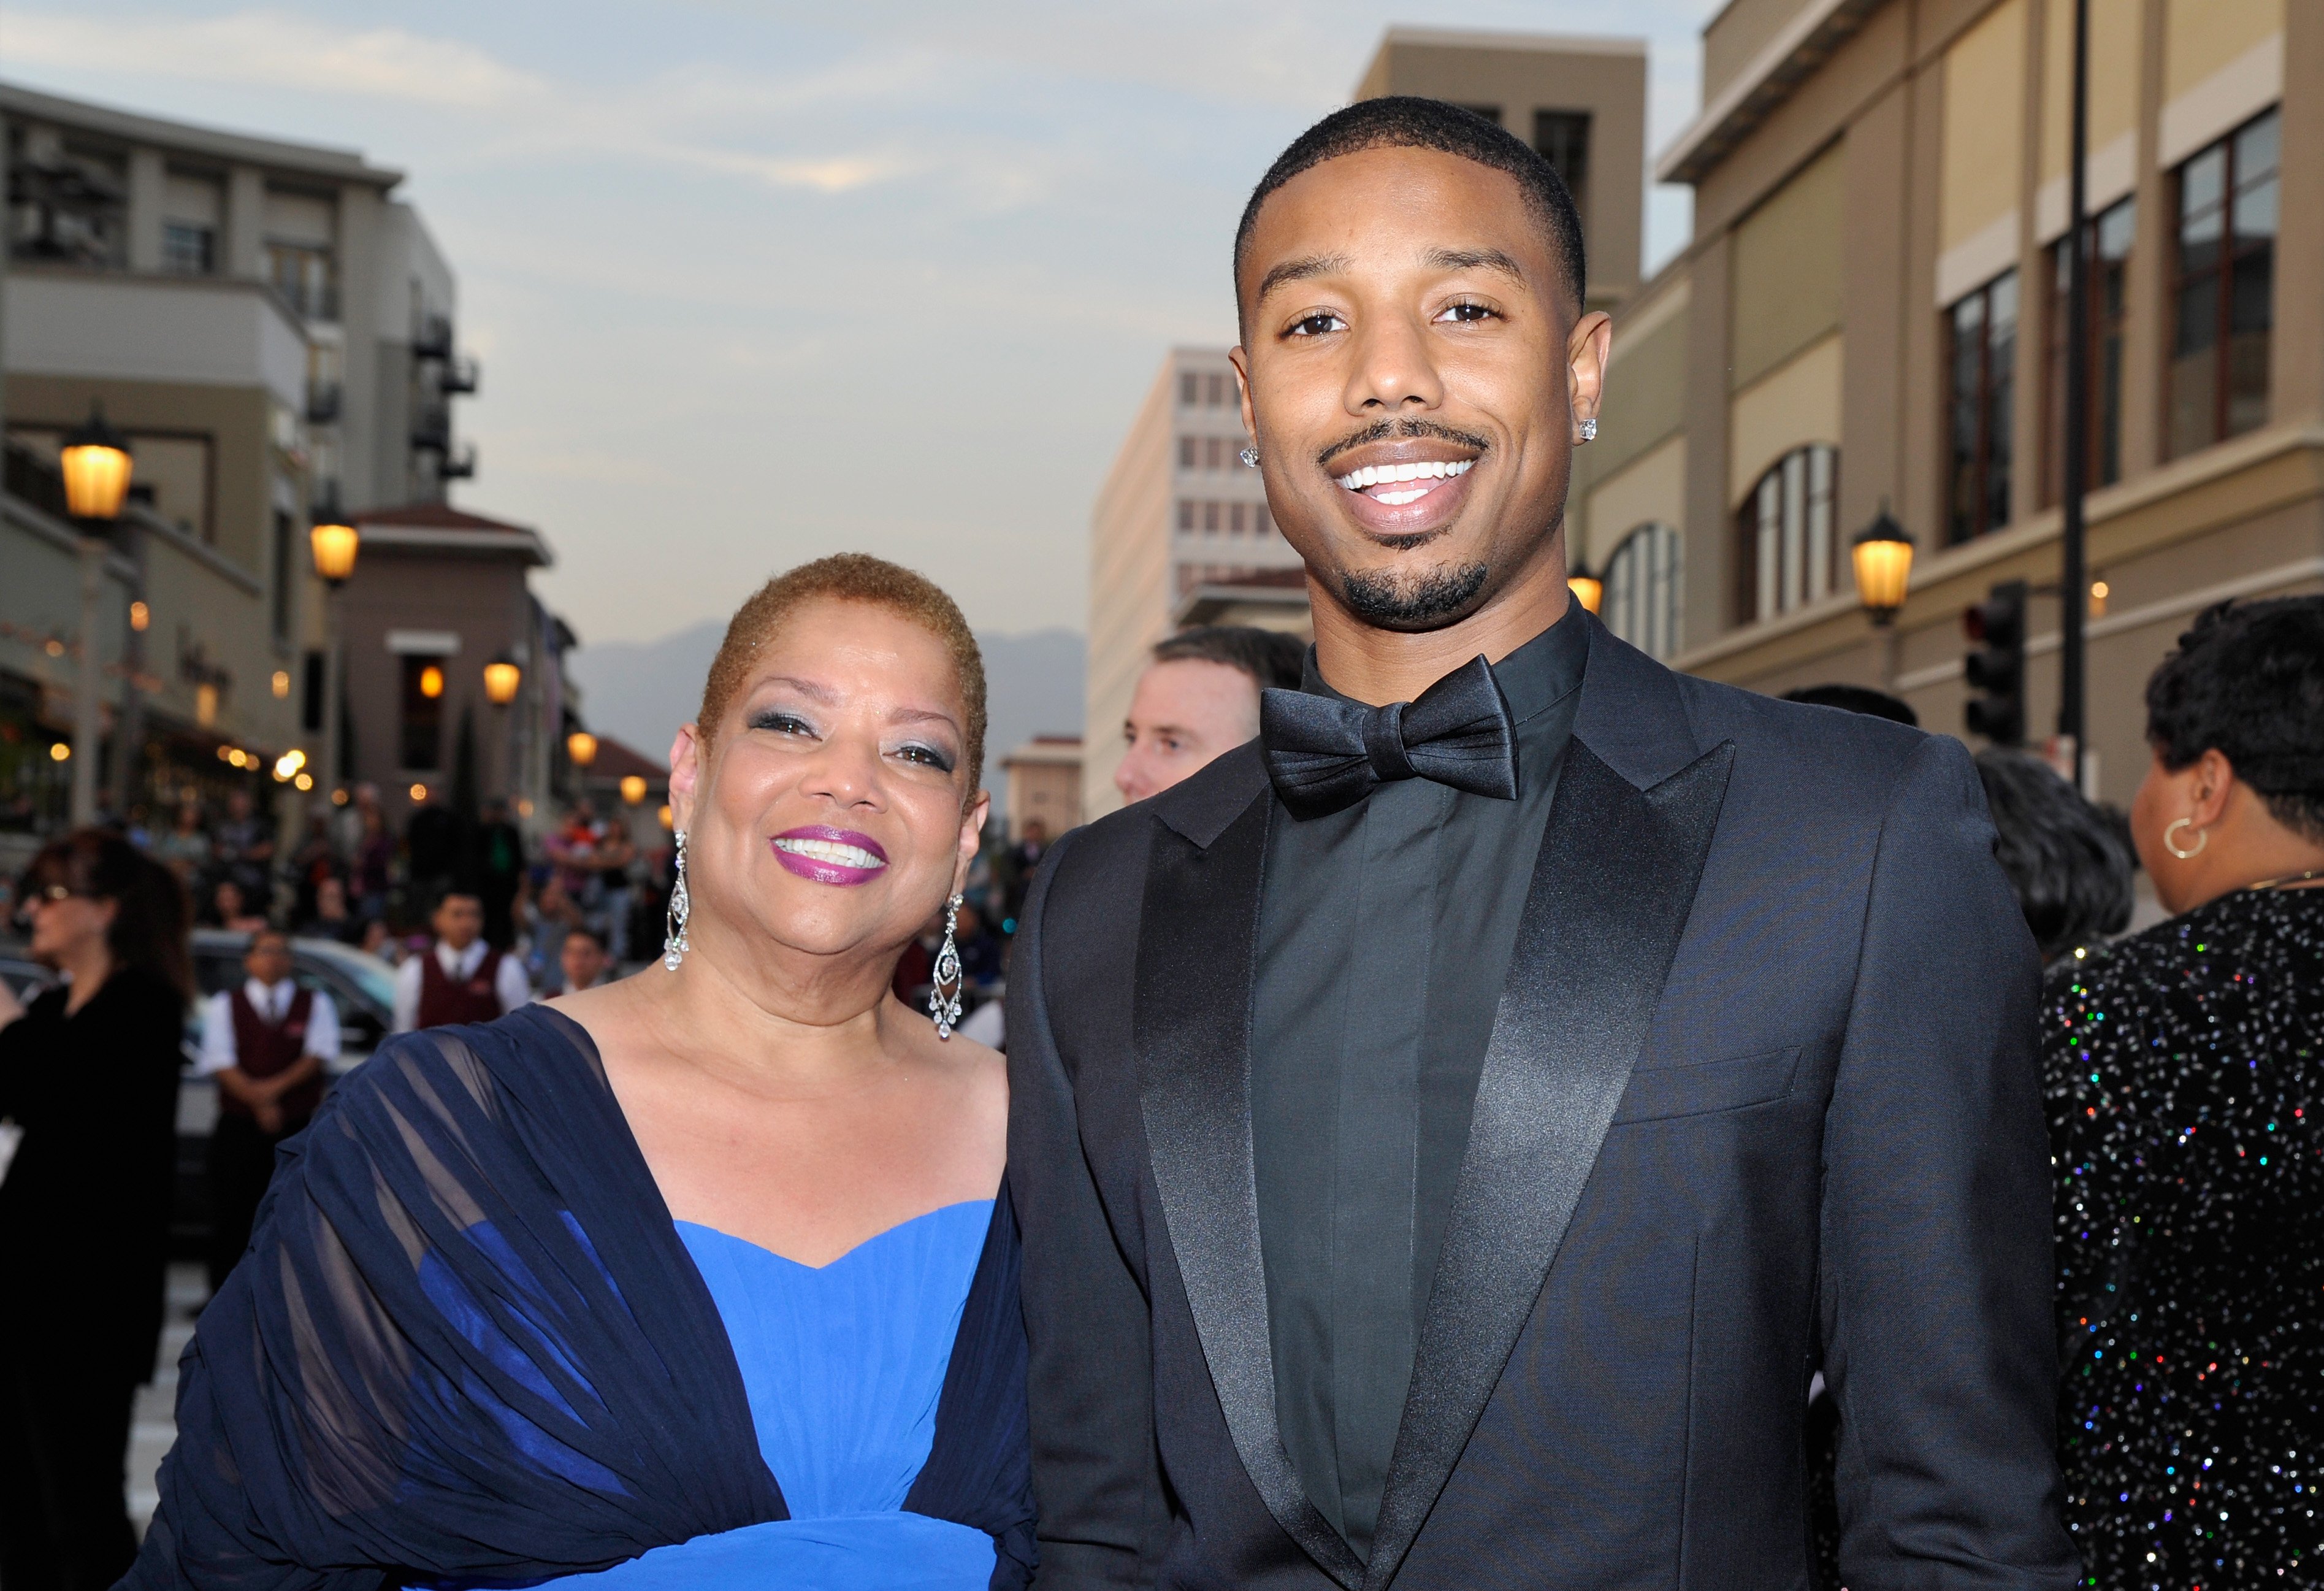 Michael B. Jordan and his mother Donna Jordan attending the 45th NAACP Image Awards at Pasadena Civic Auditorium on February 22, 2014 in Pasadena, California. | Source: Getty Images